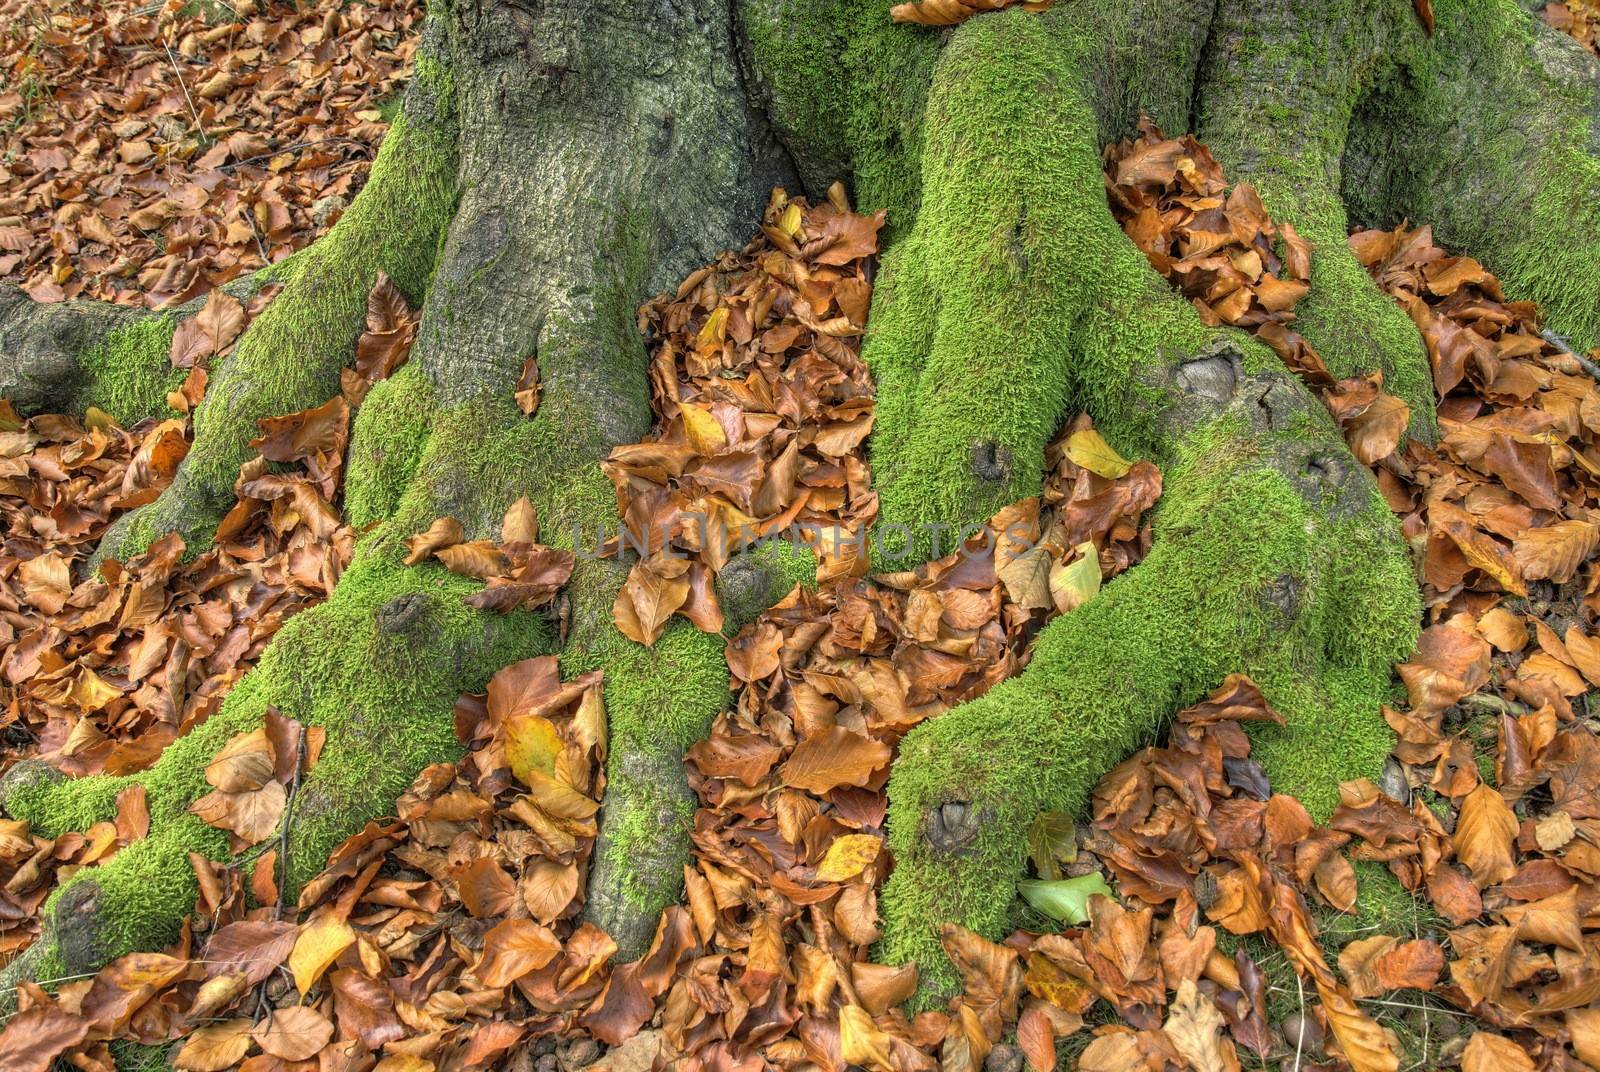 Moss covered beech tree roots surrounded by orange beech leaves.